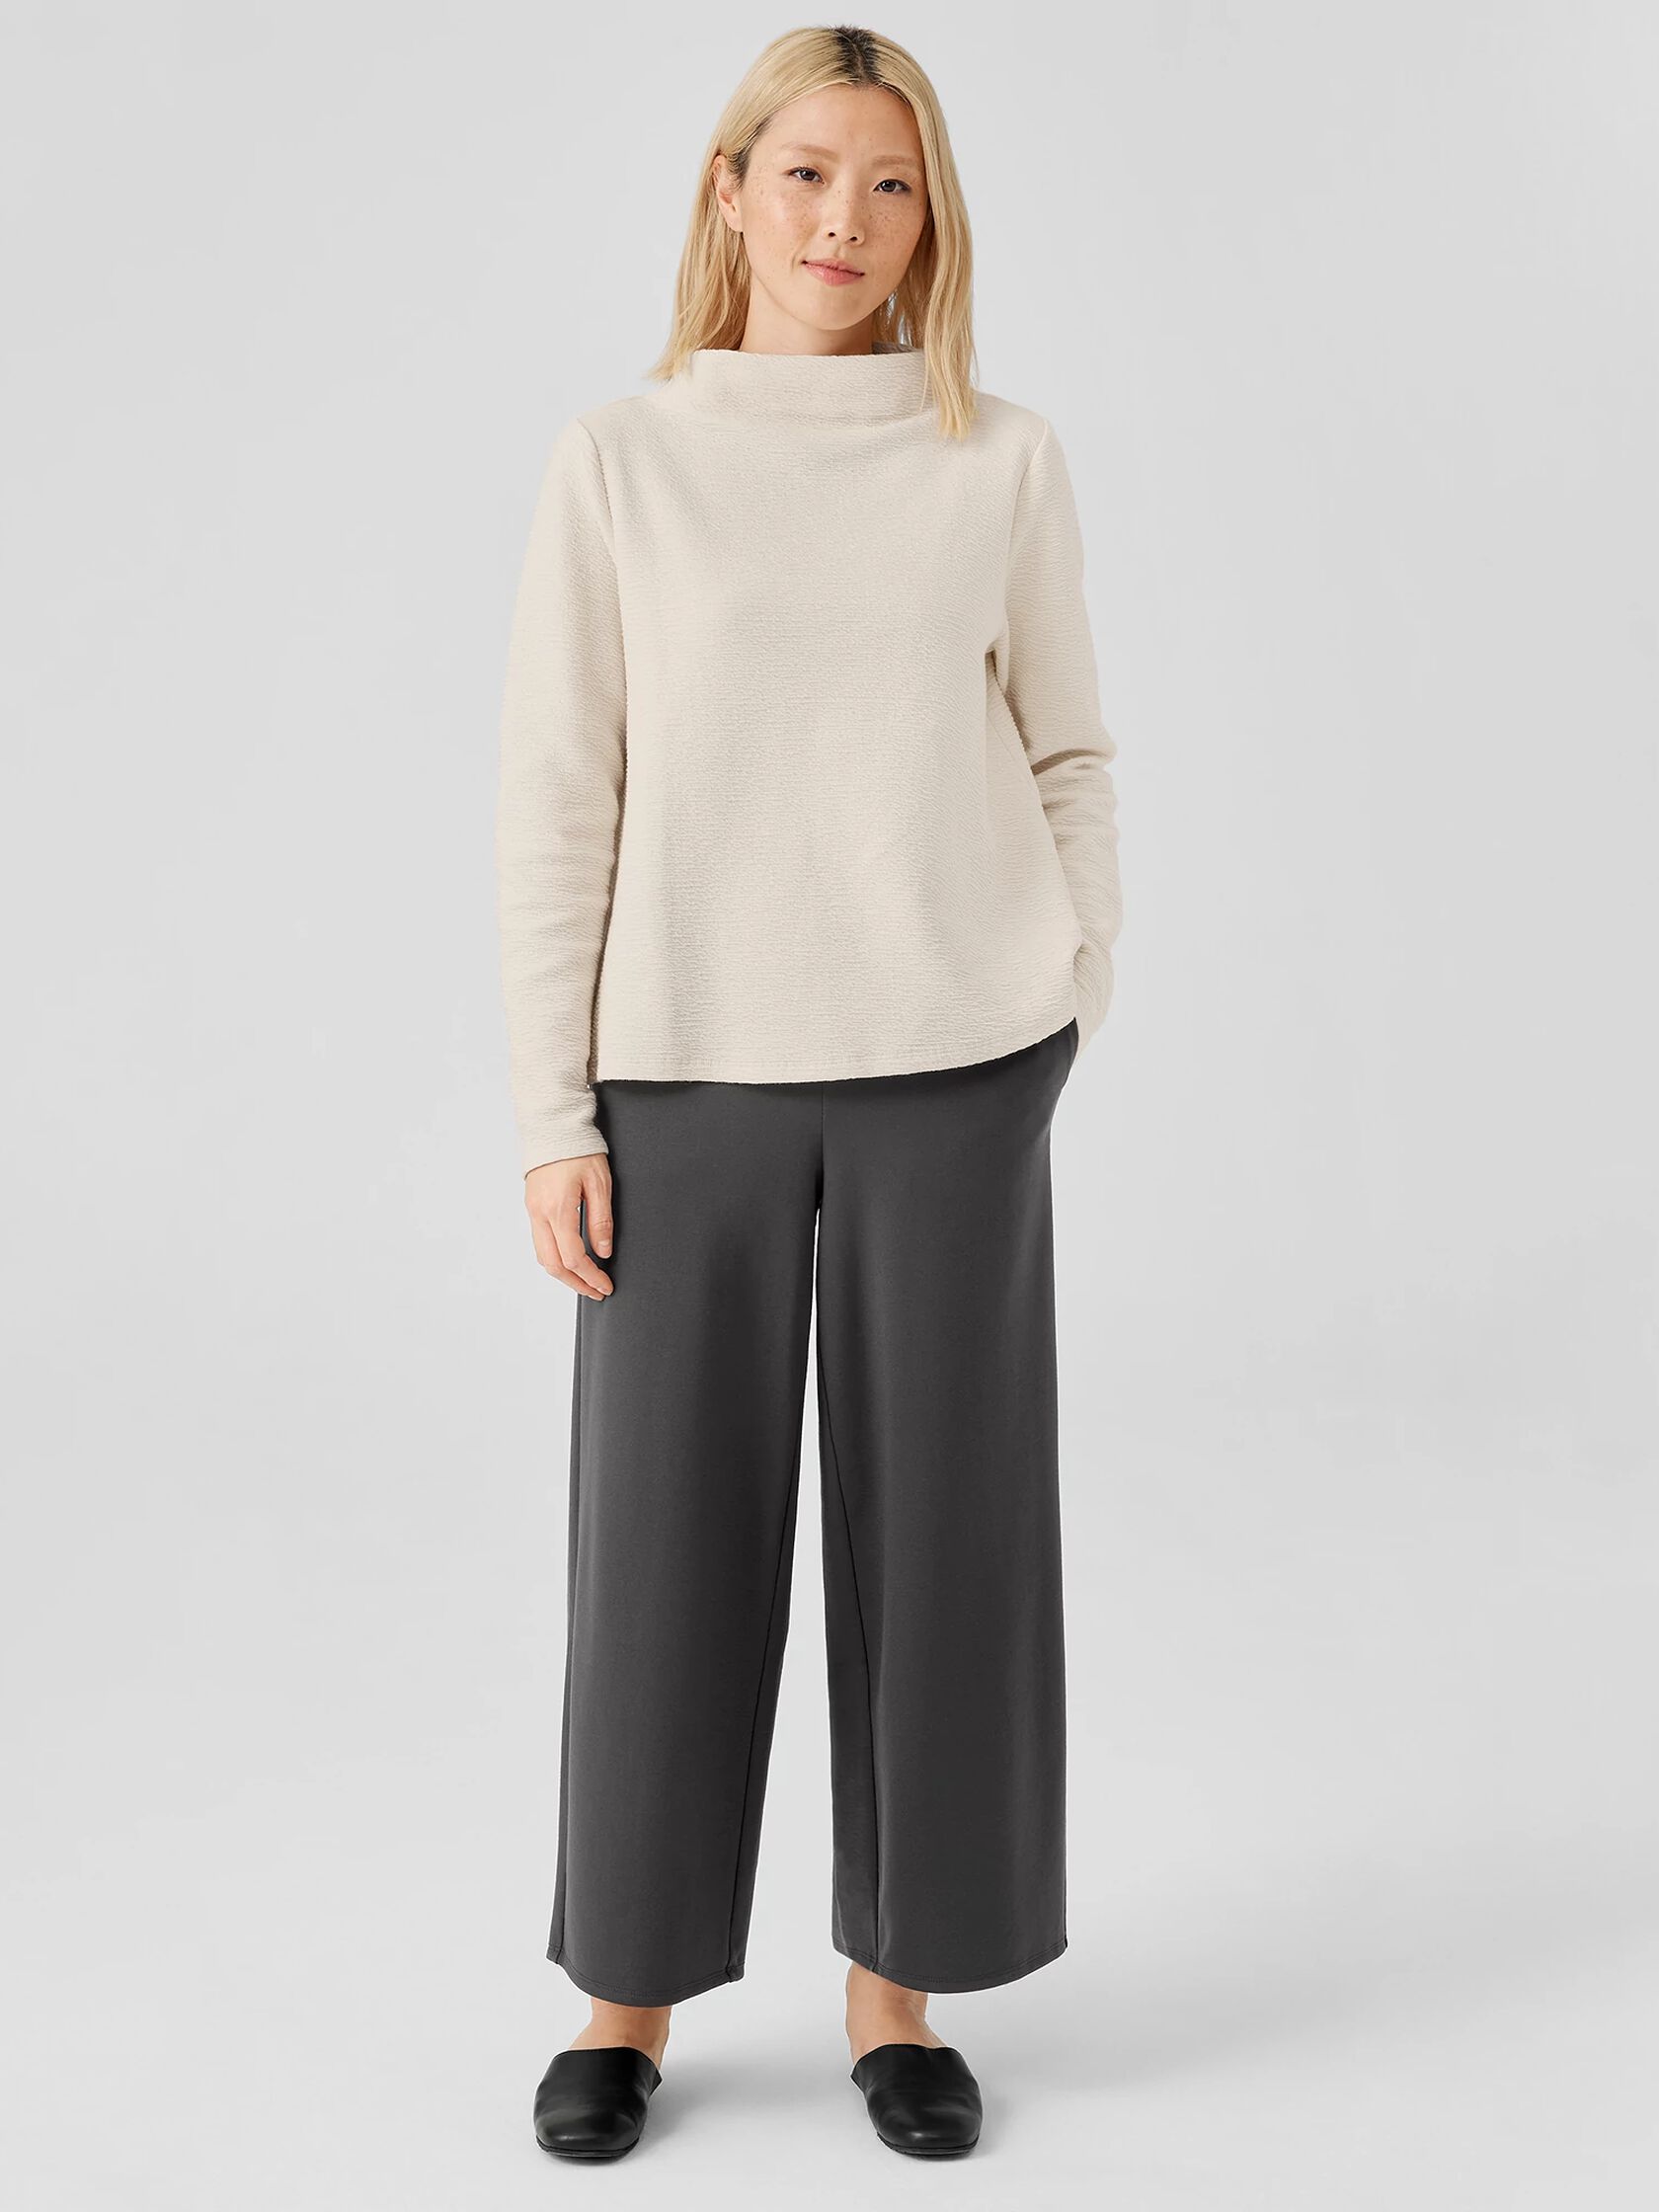 Organic Cotton Crinkled Knit Funnel Neck Top